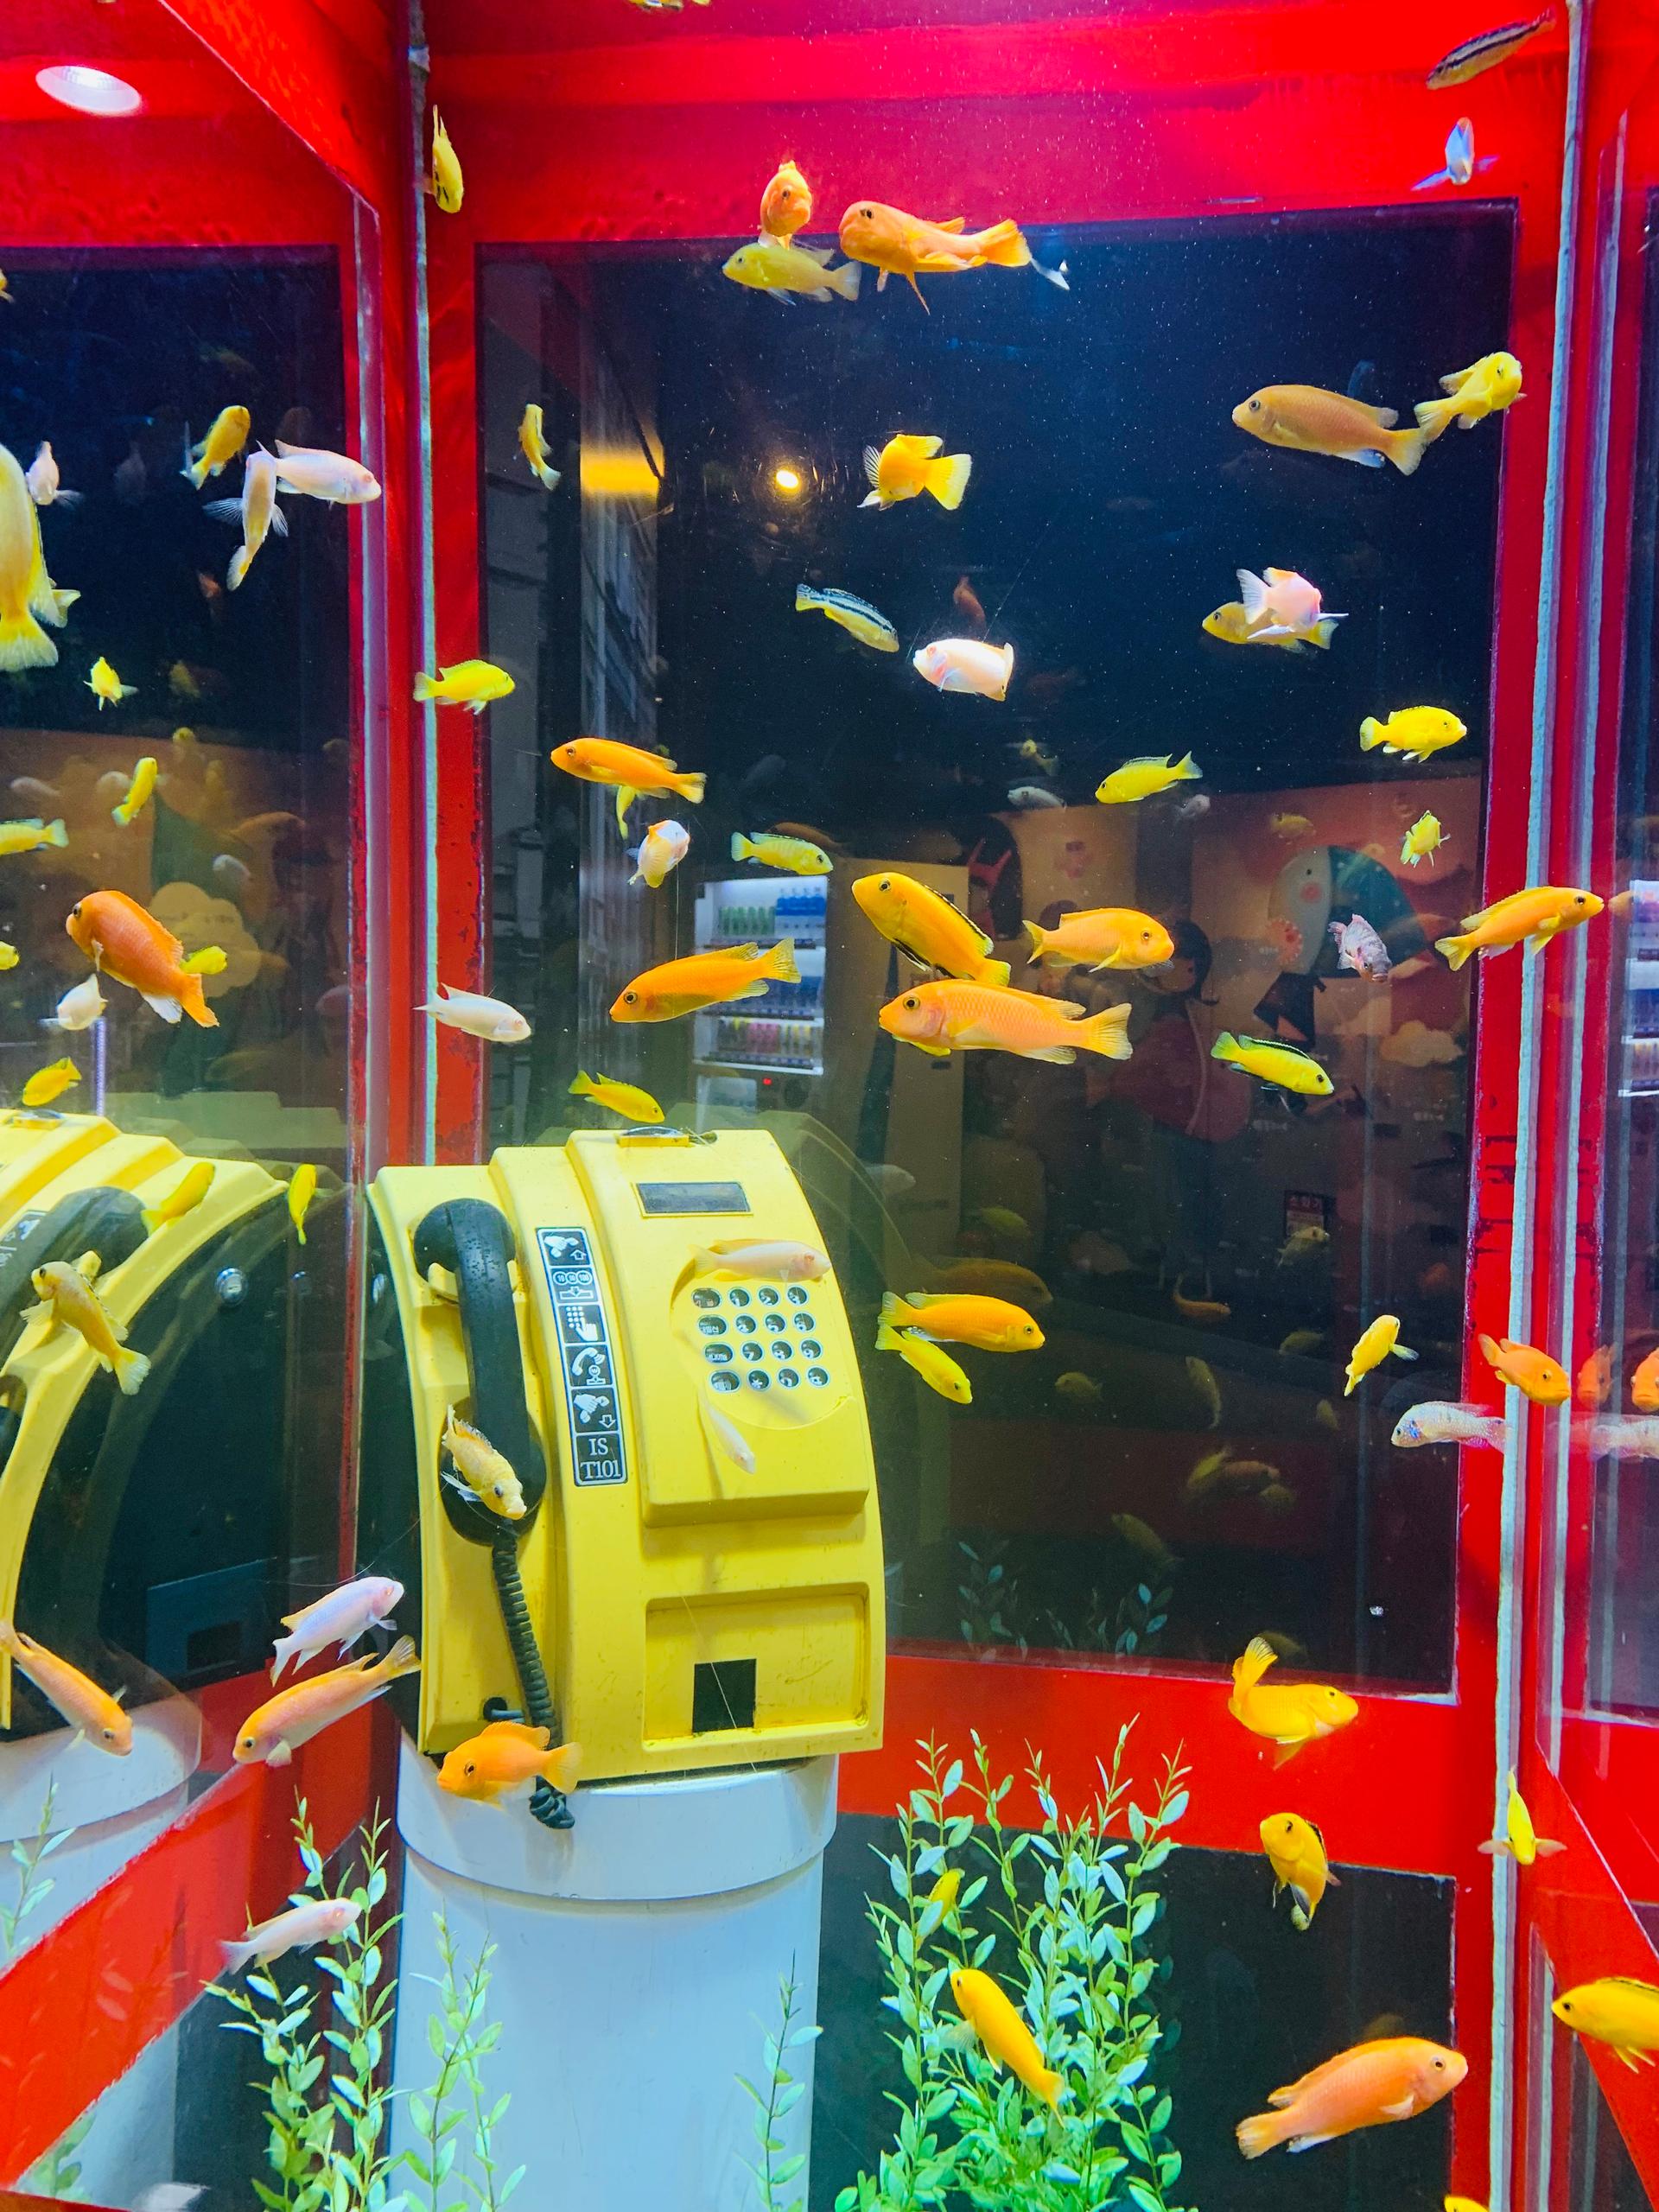 Colorful phon booth room at Coex Aquarium with yellow and green fish swimming around art installation.